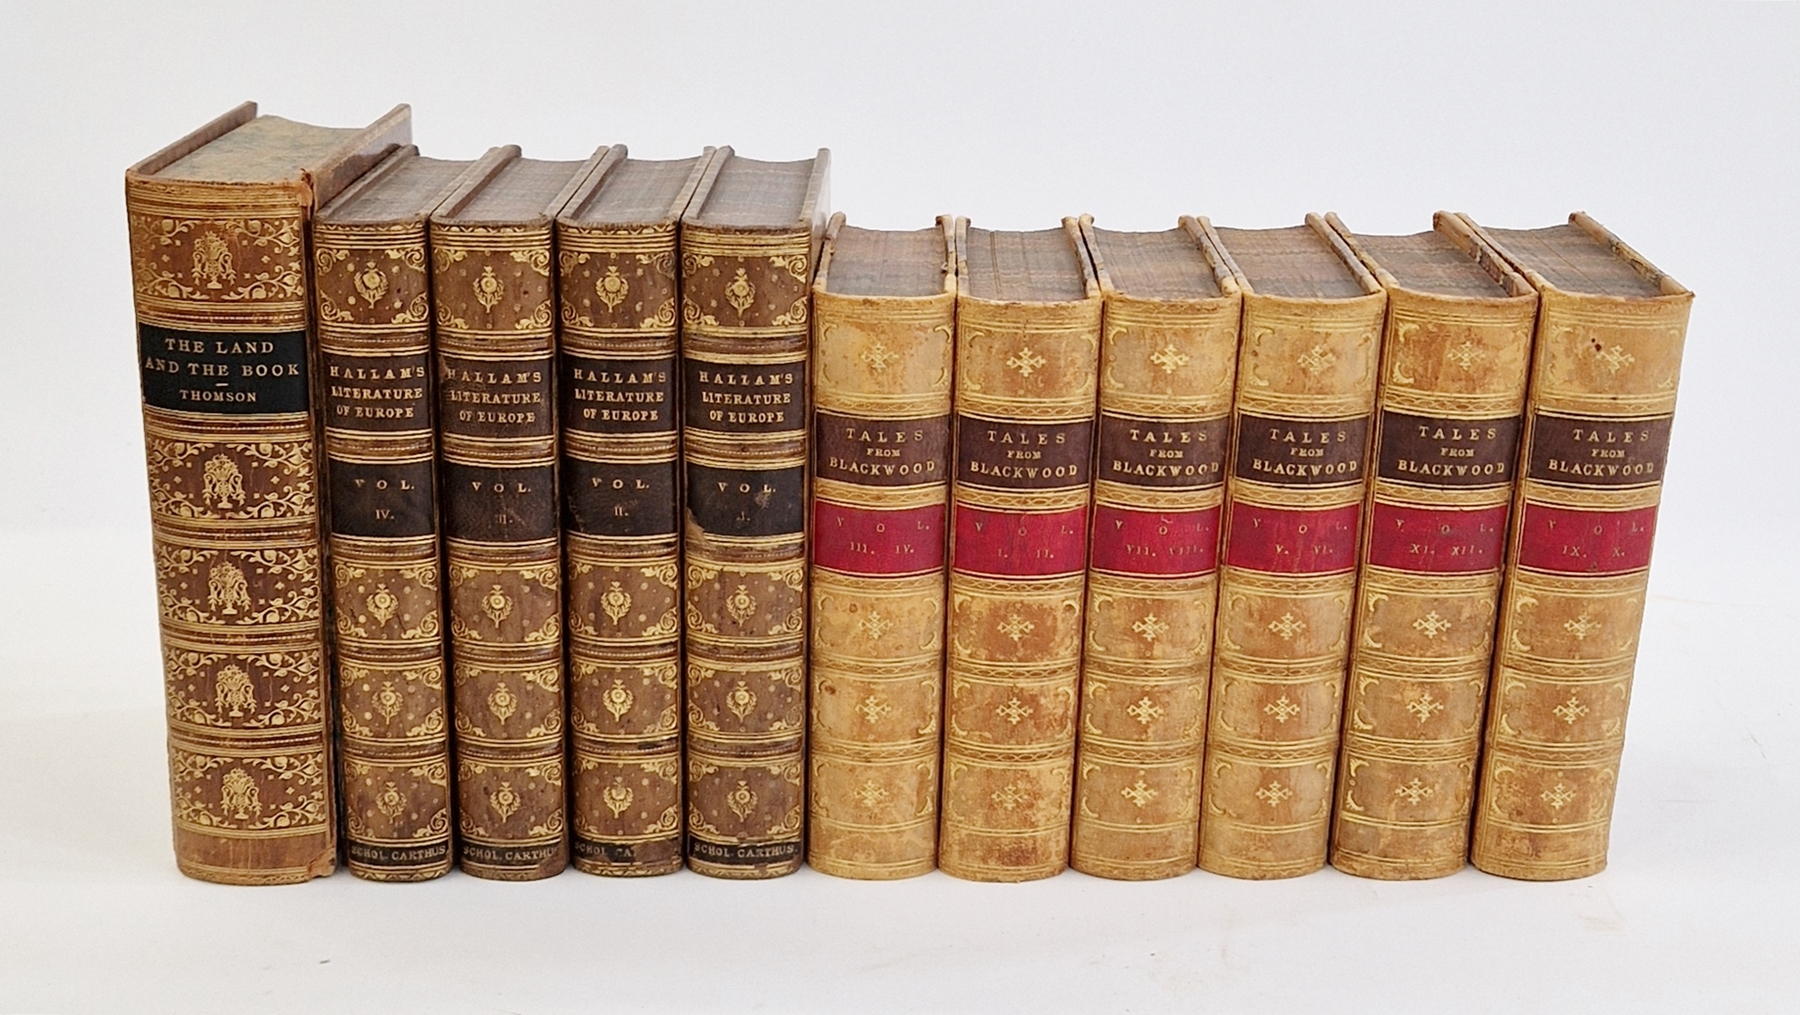 Bindings - Hallam, Henry "Introduction to the Literature of Europe...." John Murray 1872, four vols,